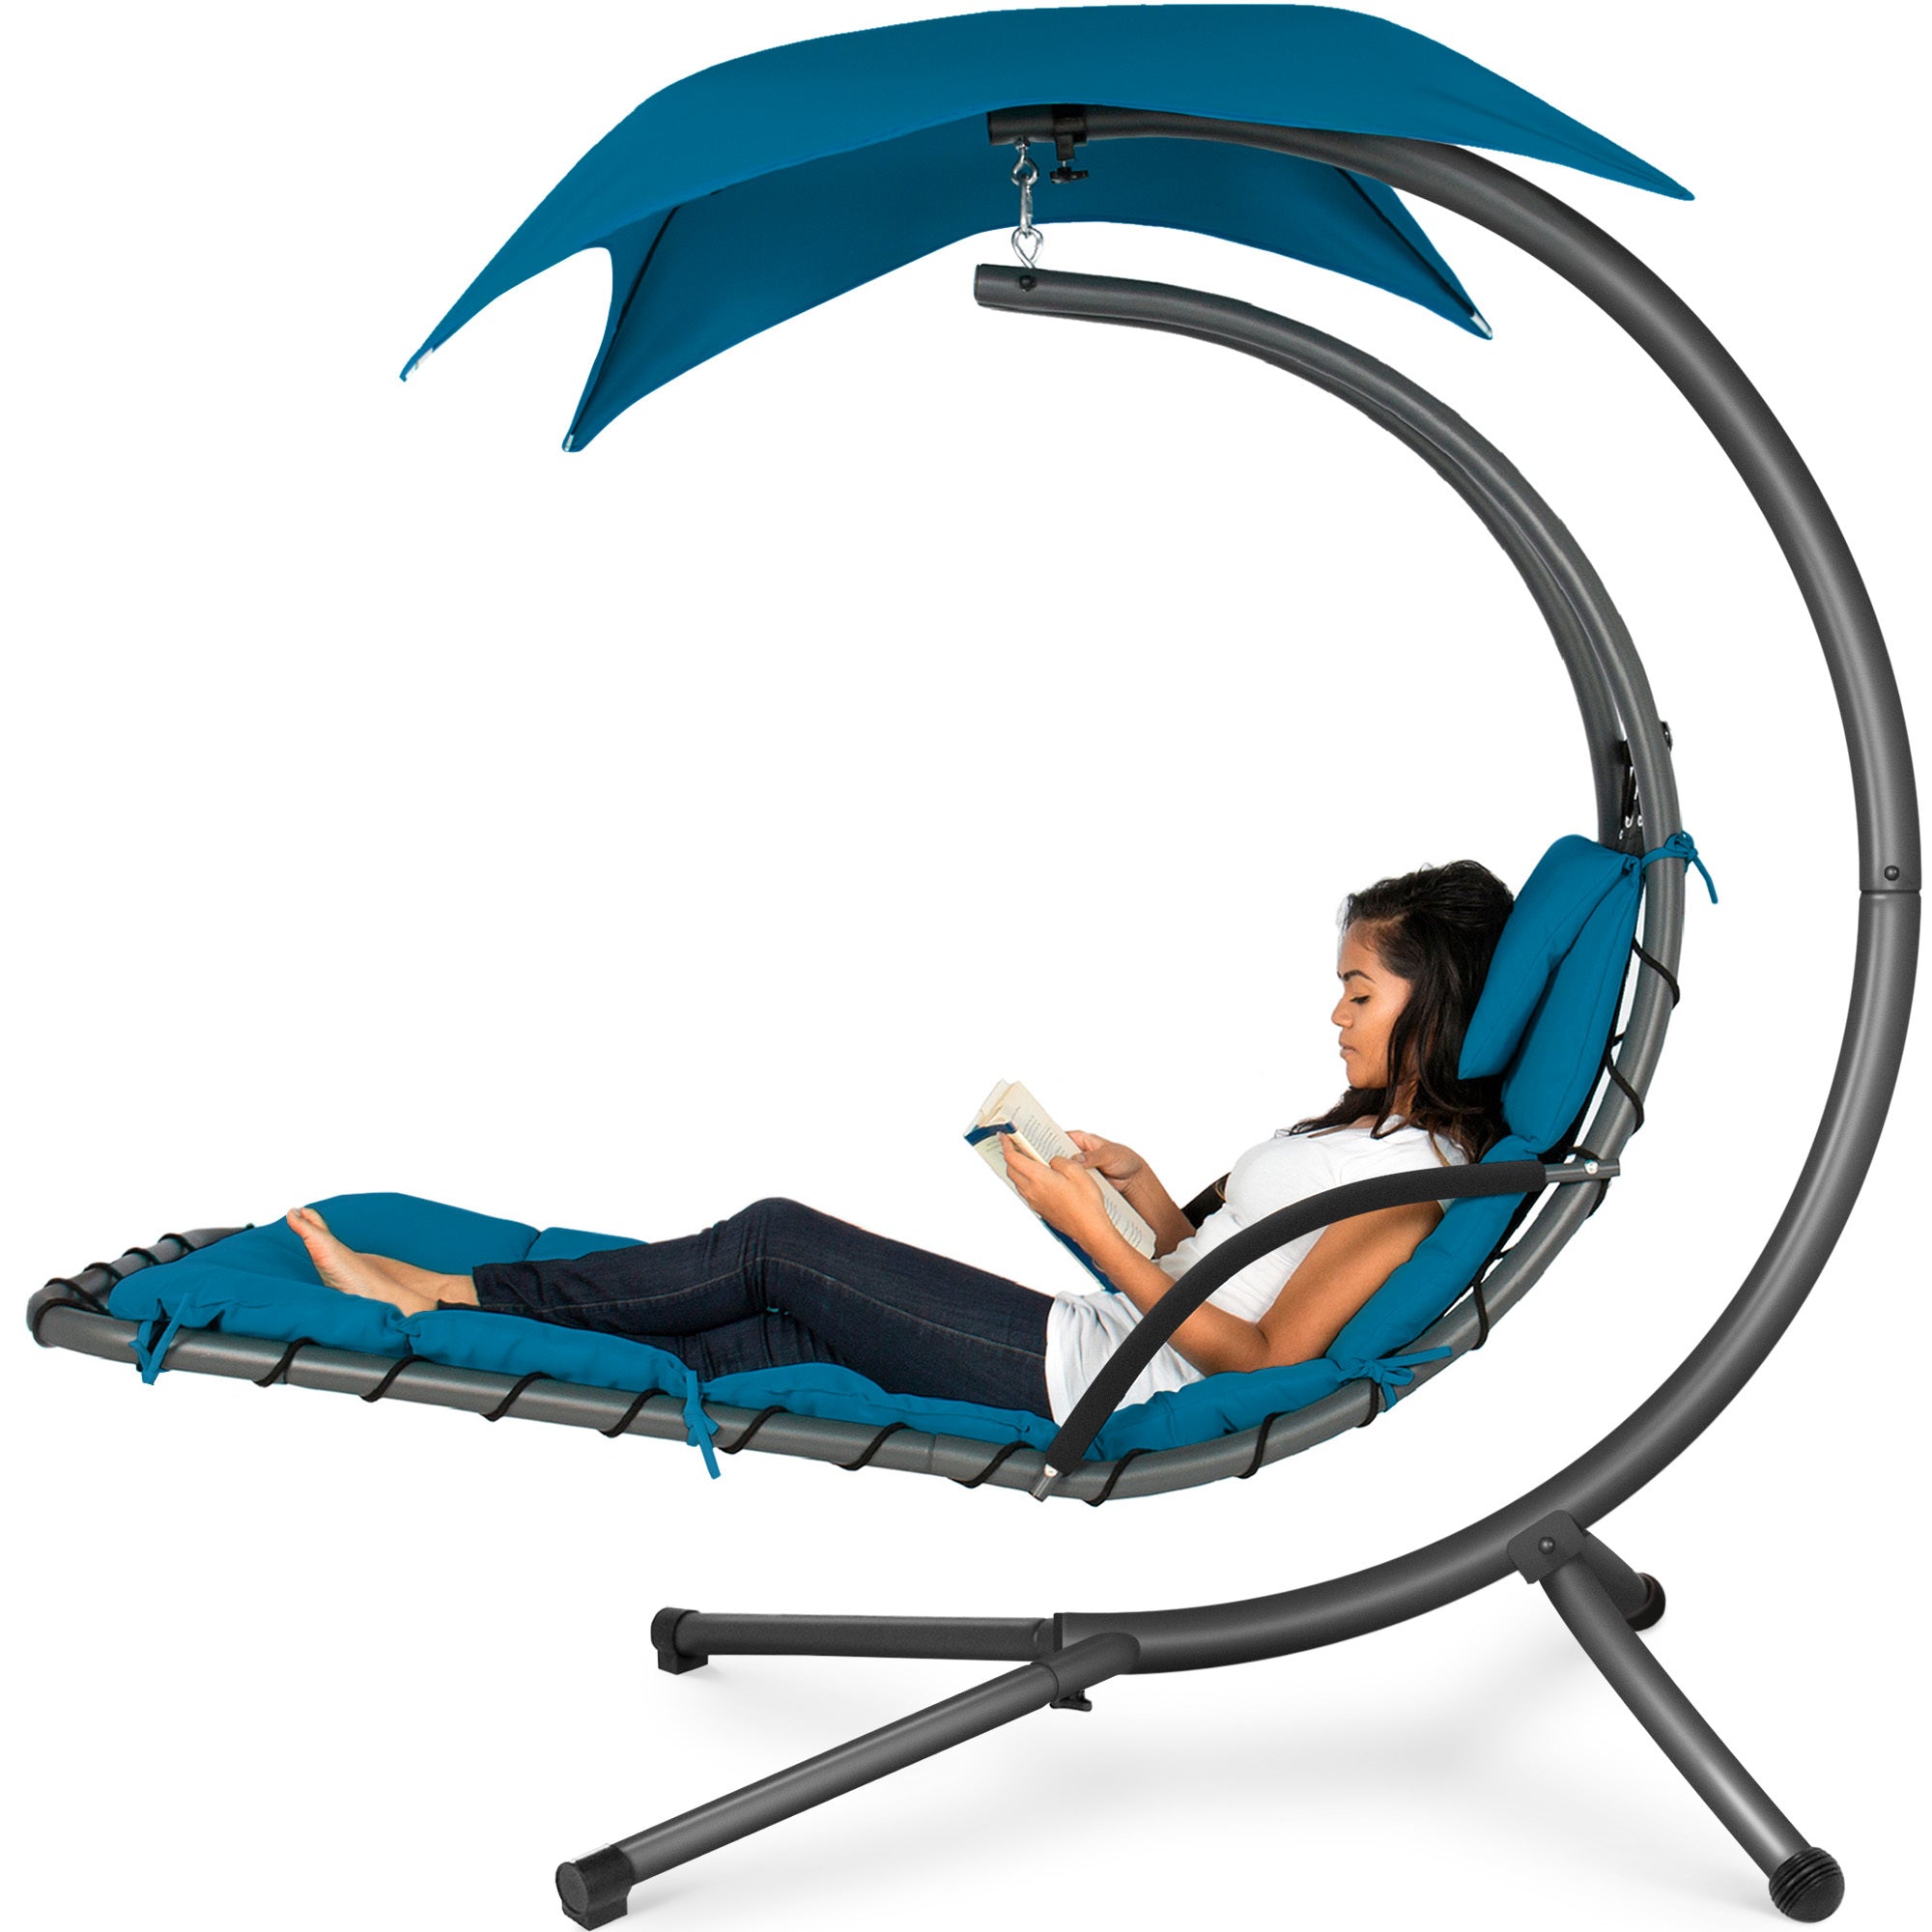 Best Choice Products Hanging Curved Chaise Lounge Chair Swing for Backyard, Patio w/ Pillow, Shade, Stand - Peacock Blue